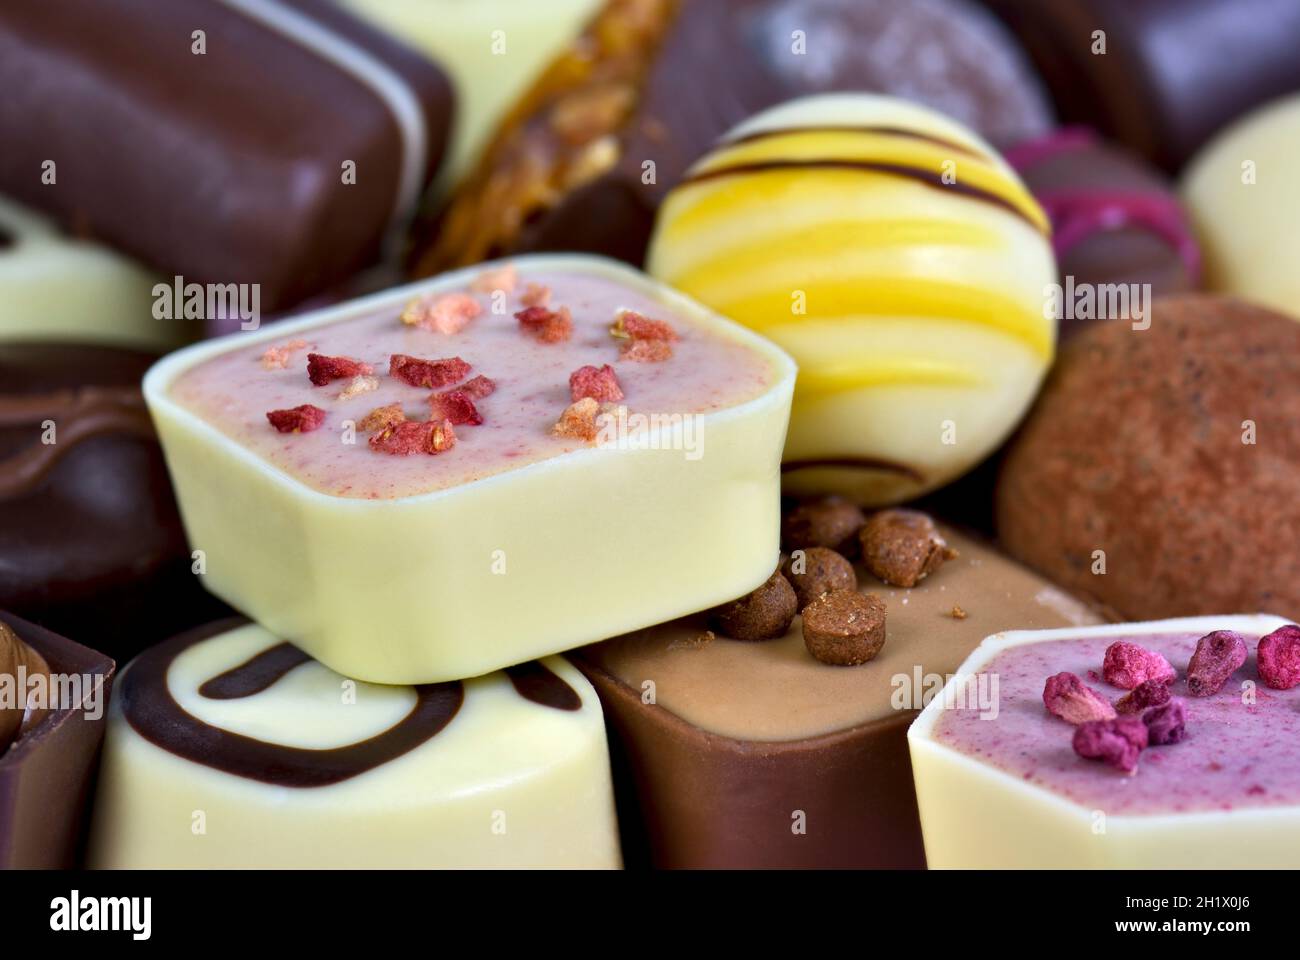 Full frame close up of luxury continental or Belgian assorted chocolates Stock Photo